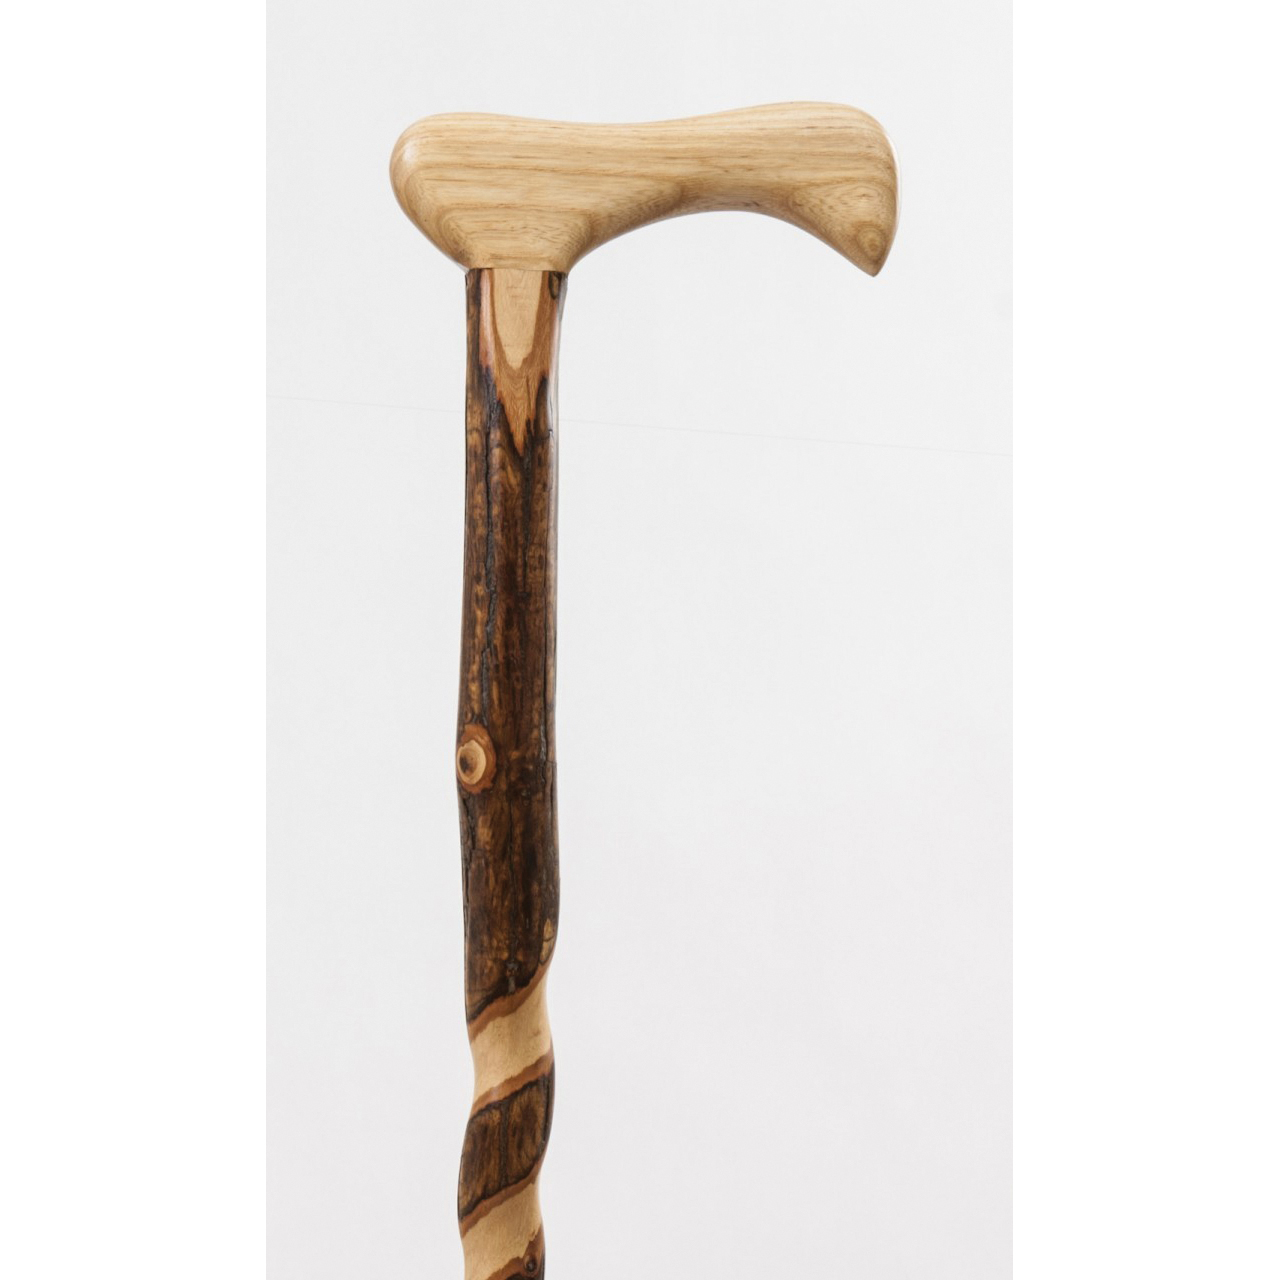 Brazos 502-3000-0226 Twisted Rustic Walking Cane, 37 in H Cane, Standard Handle, Wood Handle, Hickory Wood - 2